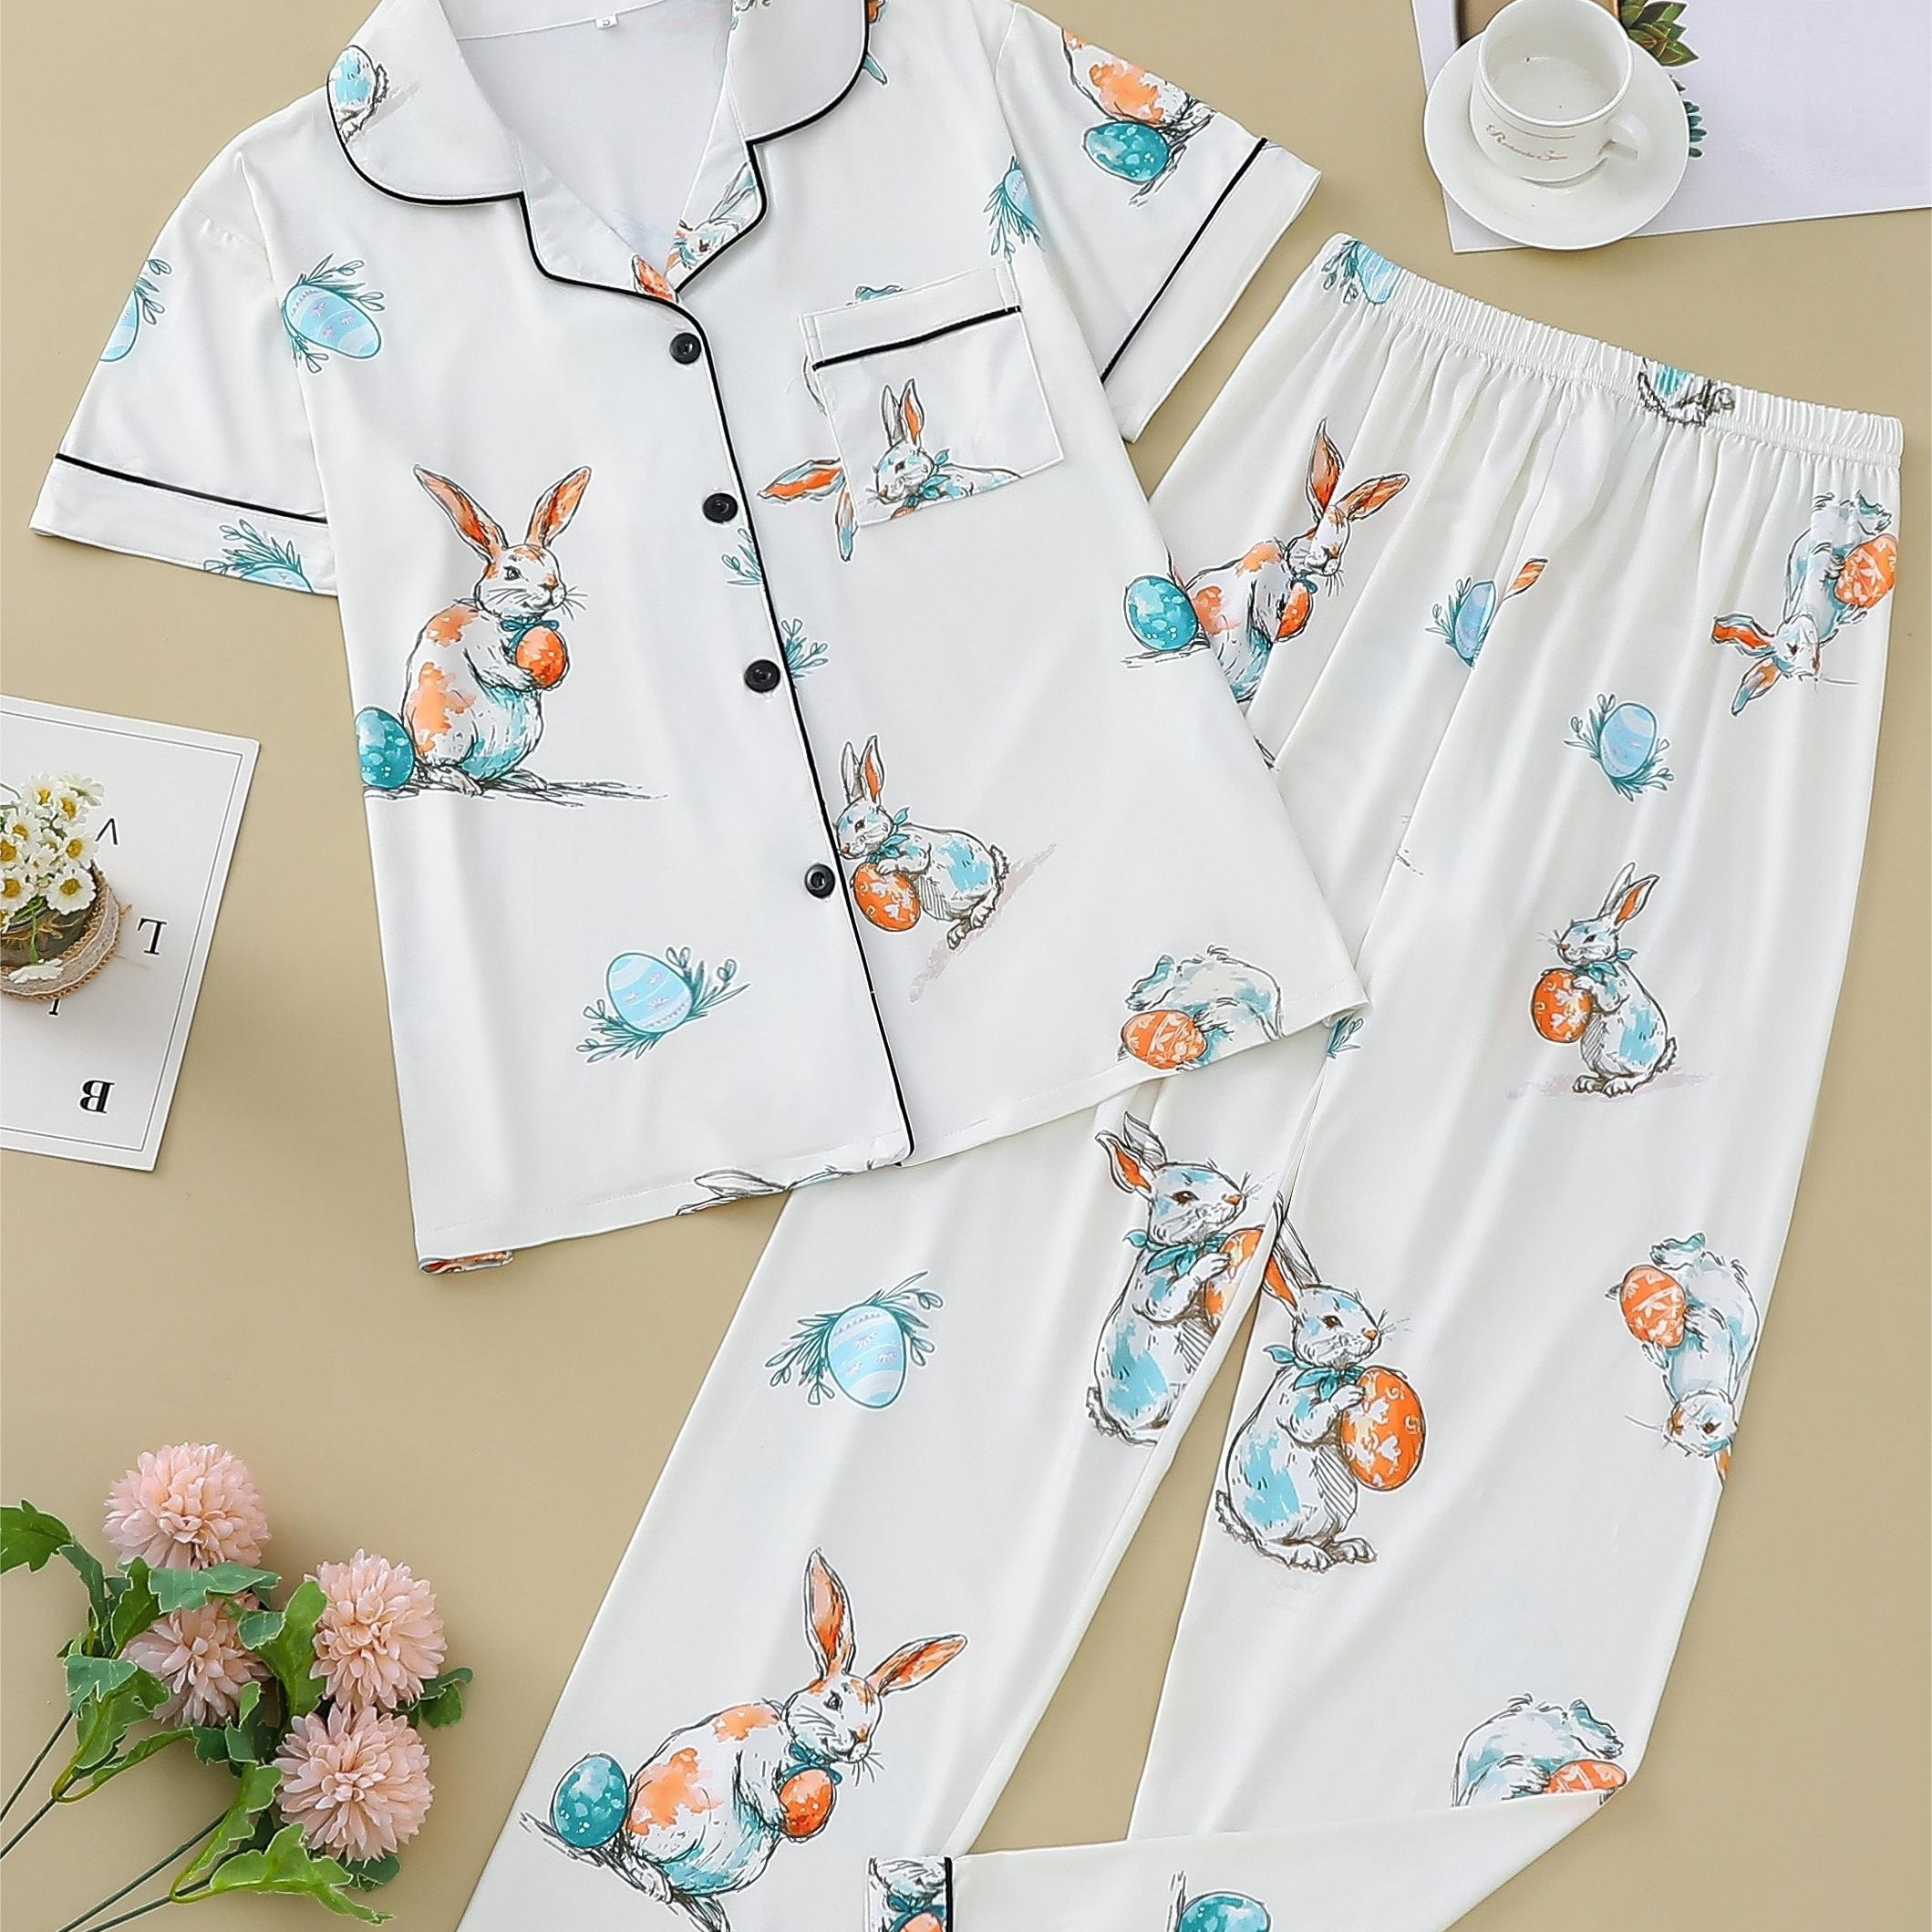 

Cute Bunny With Egg Print Pajama Set For Easter, Short Sleeve Button Up Lapel Collar Top & Elastic Pants, Women's Sleepwear & Loungewear